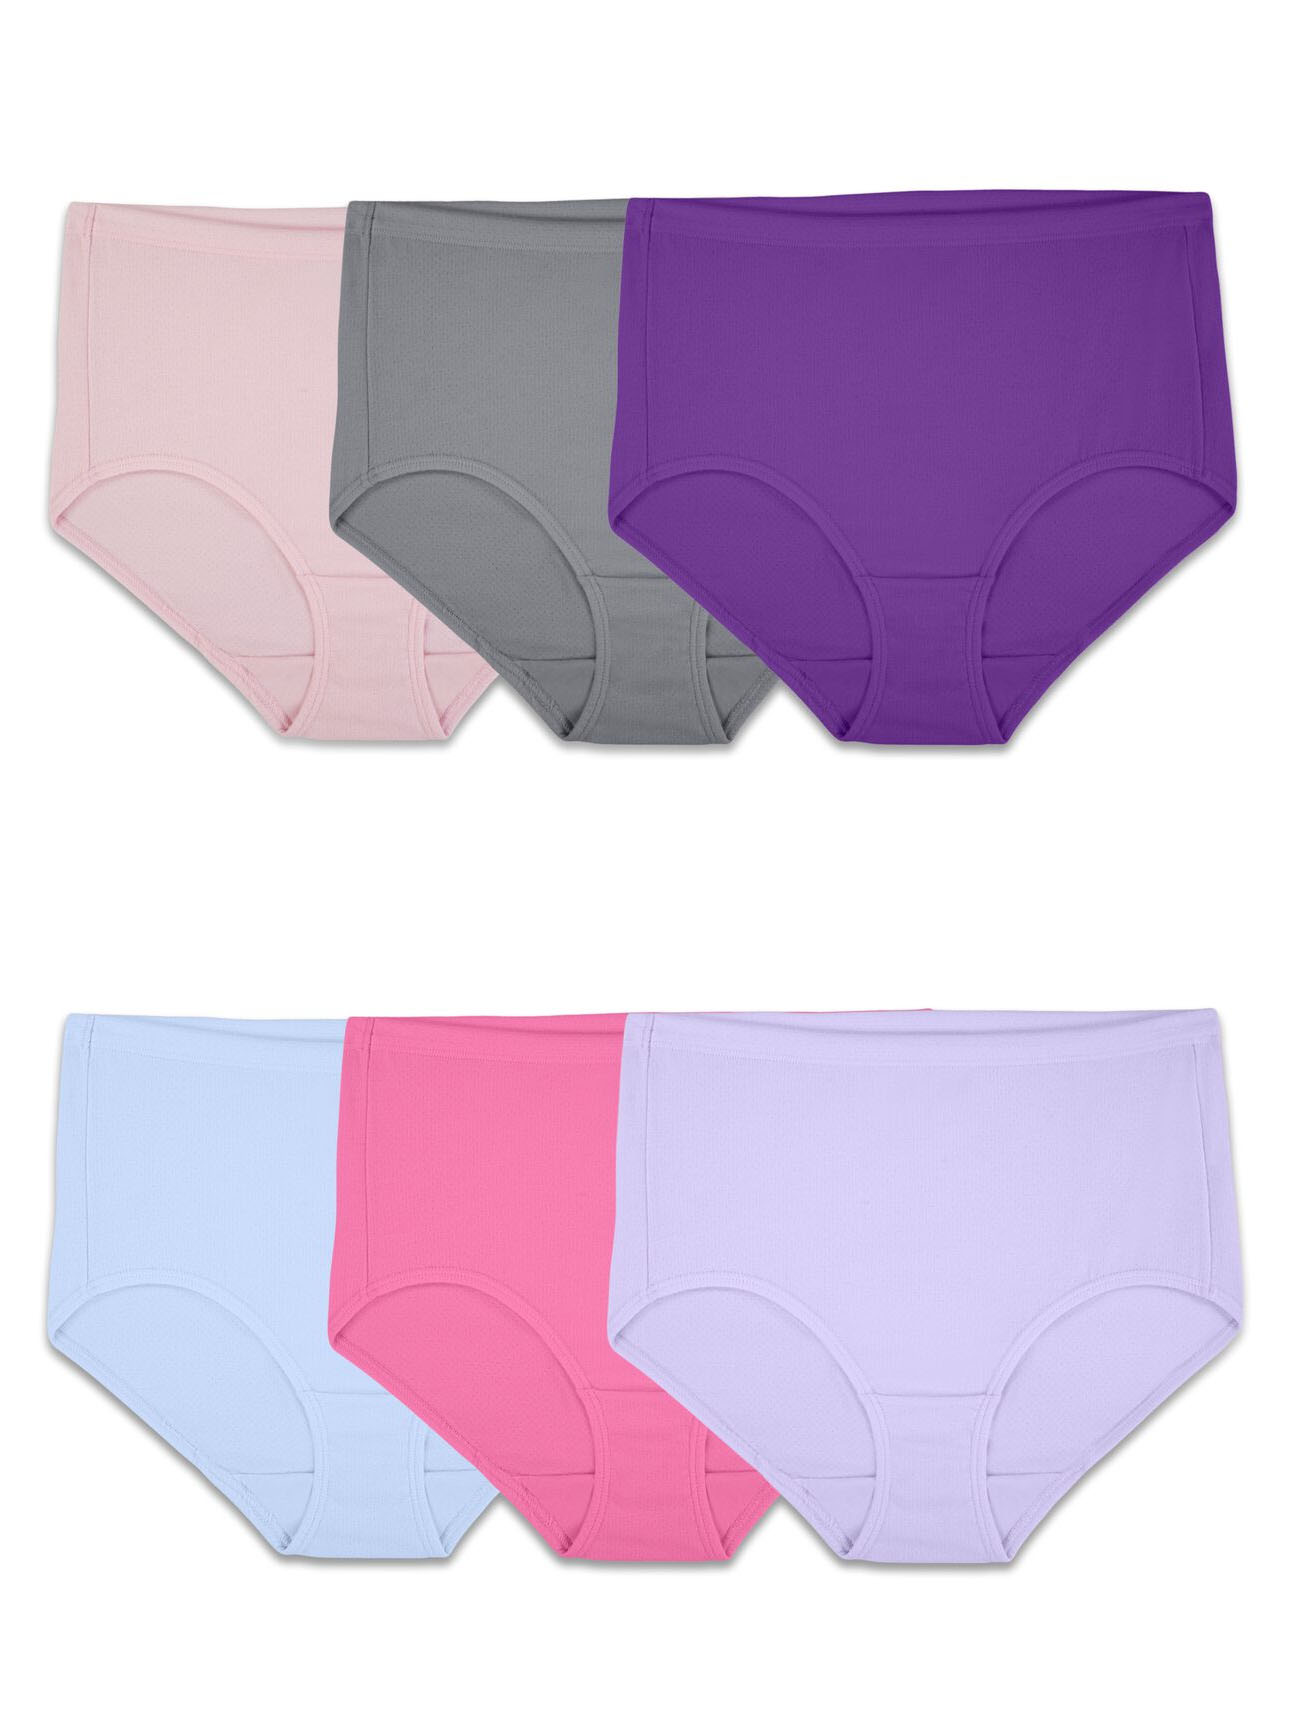 Fruit of The Loom Women's 6 PK Breathable Cotton Mesh Briefs Size 7 LG  Assorted for sale online